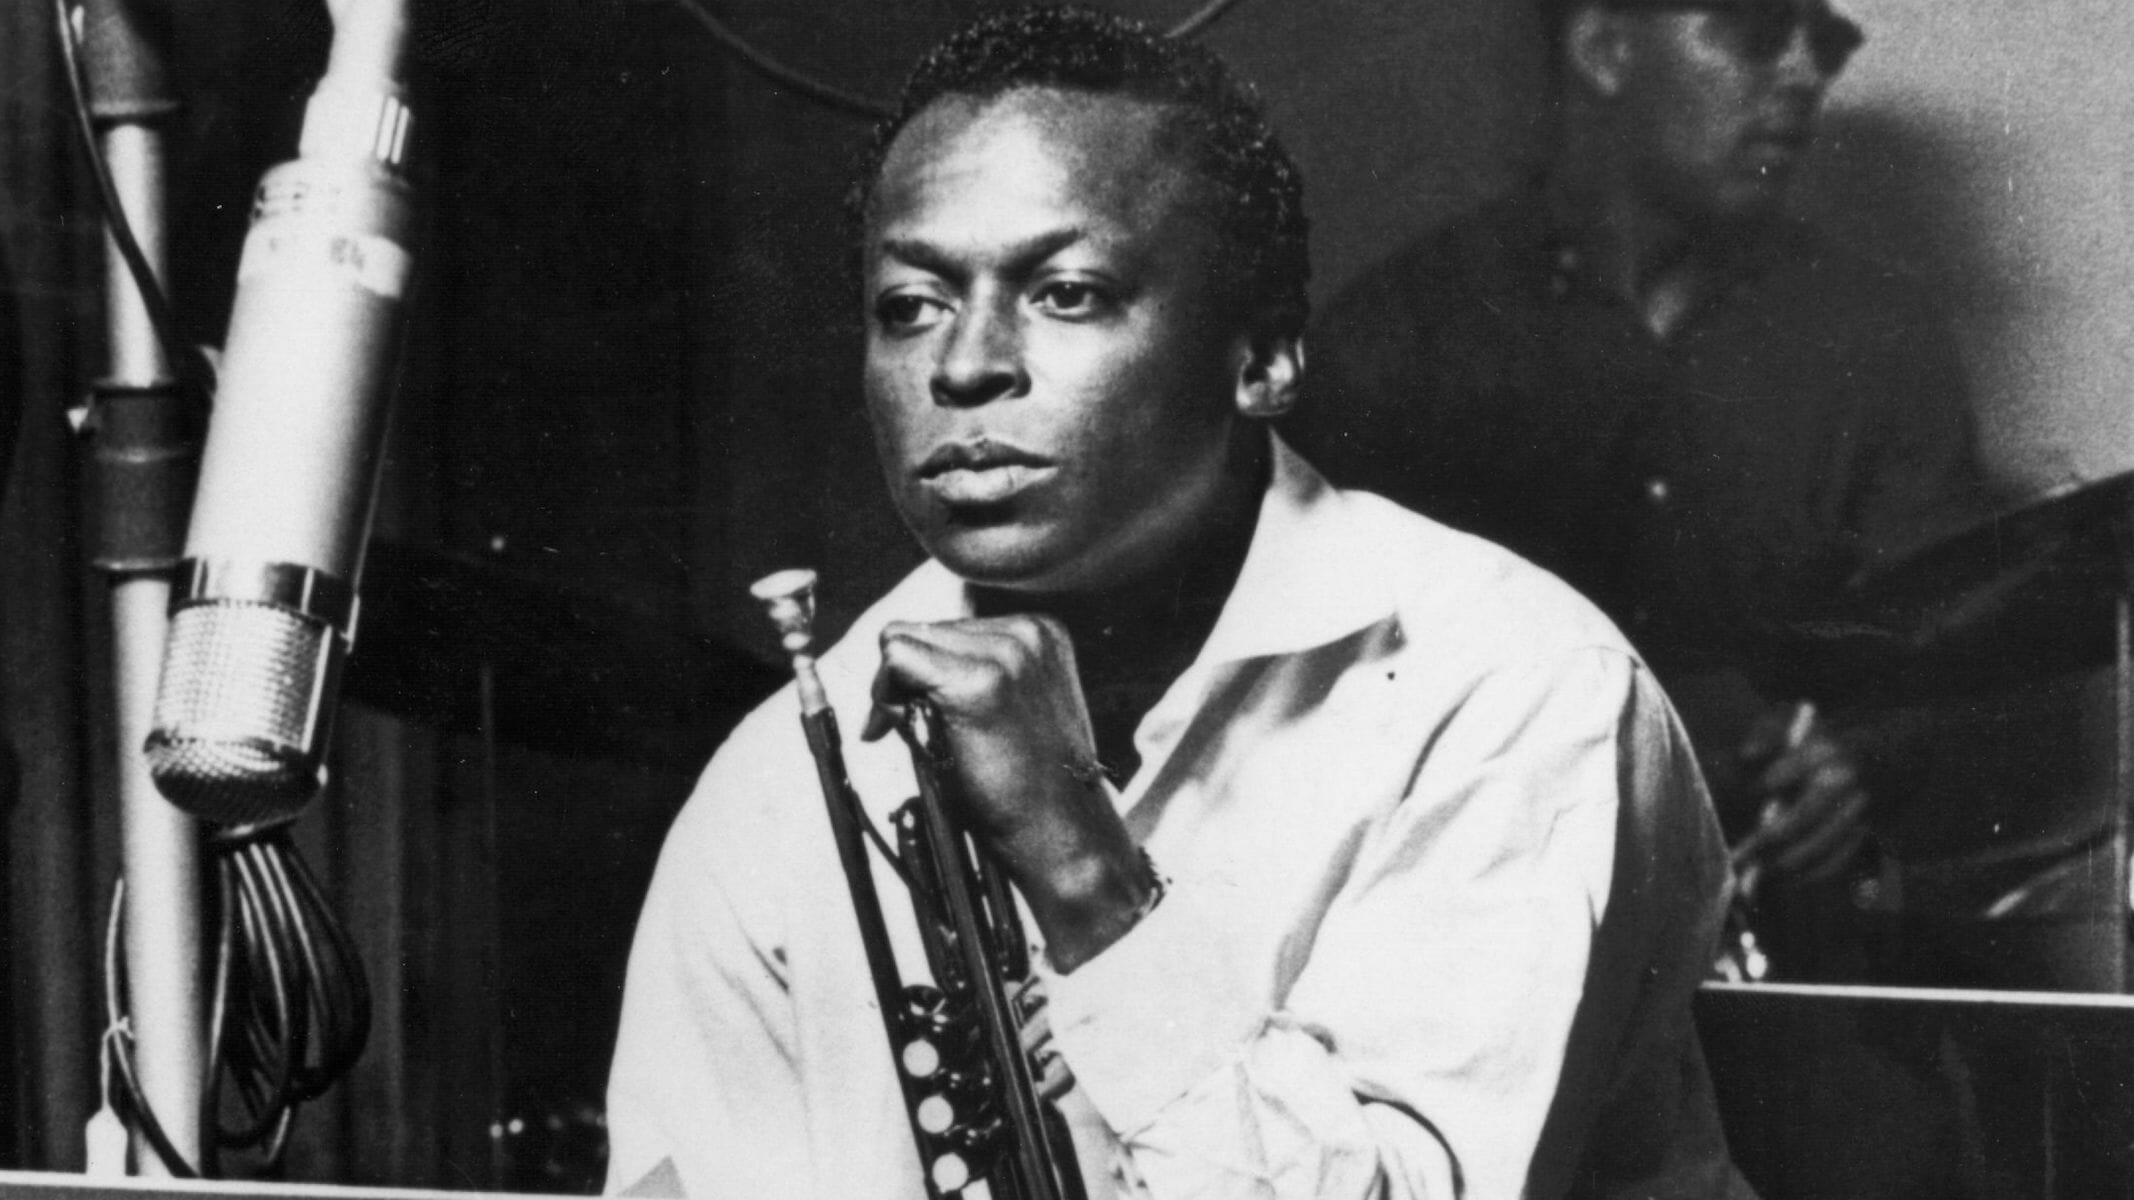 Hear Miles Davis Soar in a Career-High Moment on This Day in 1971